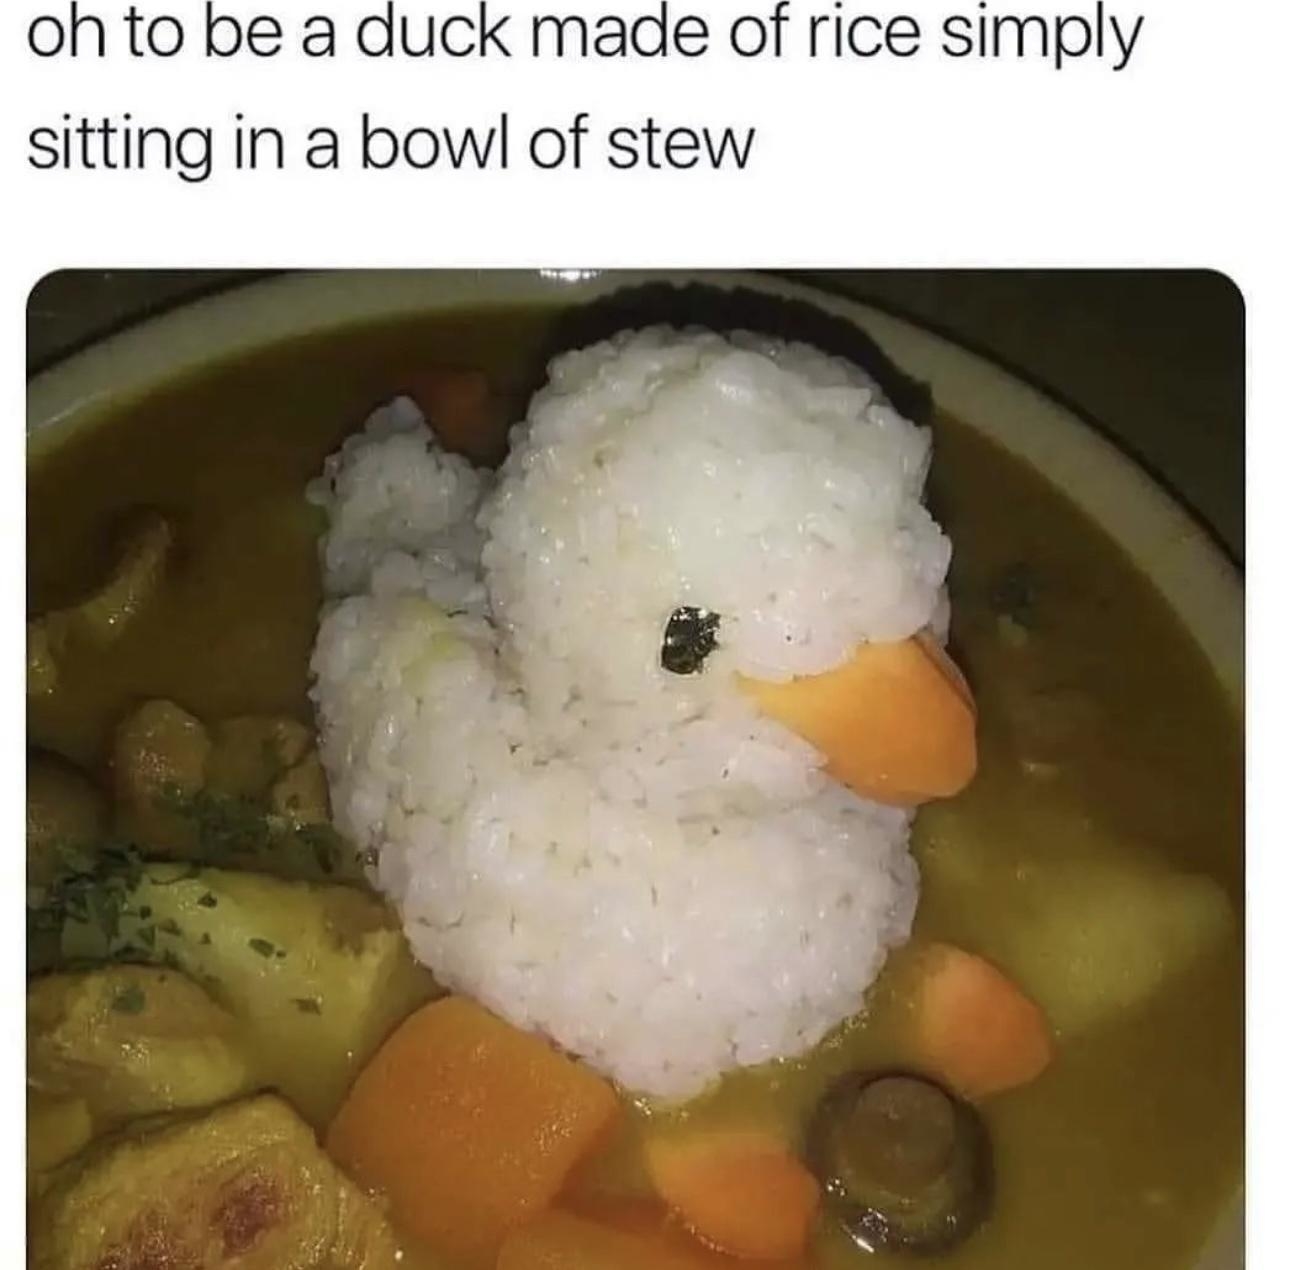 Rice shaped like a duck in a pot